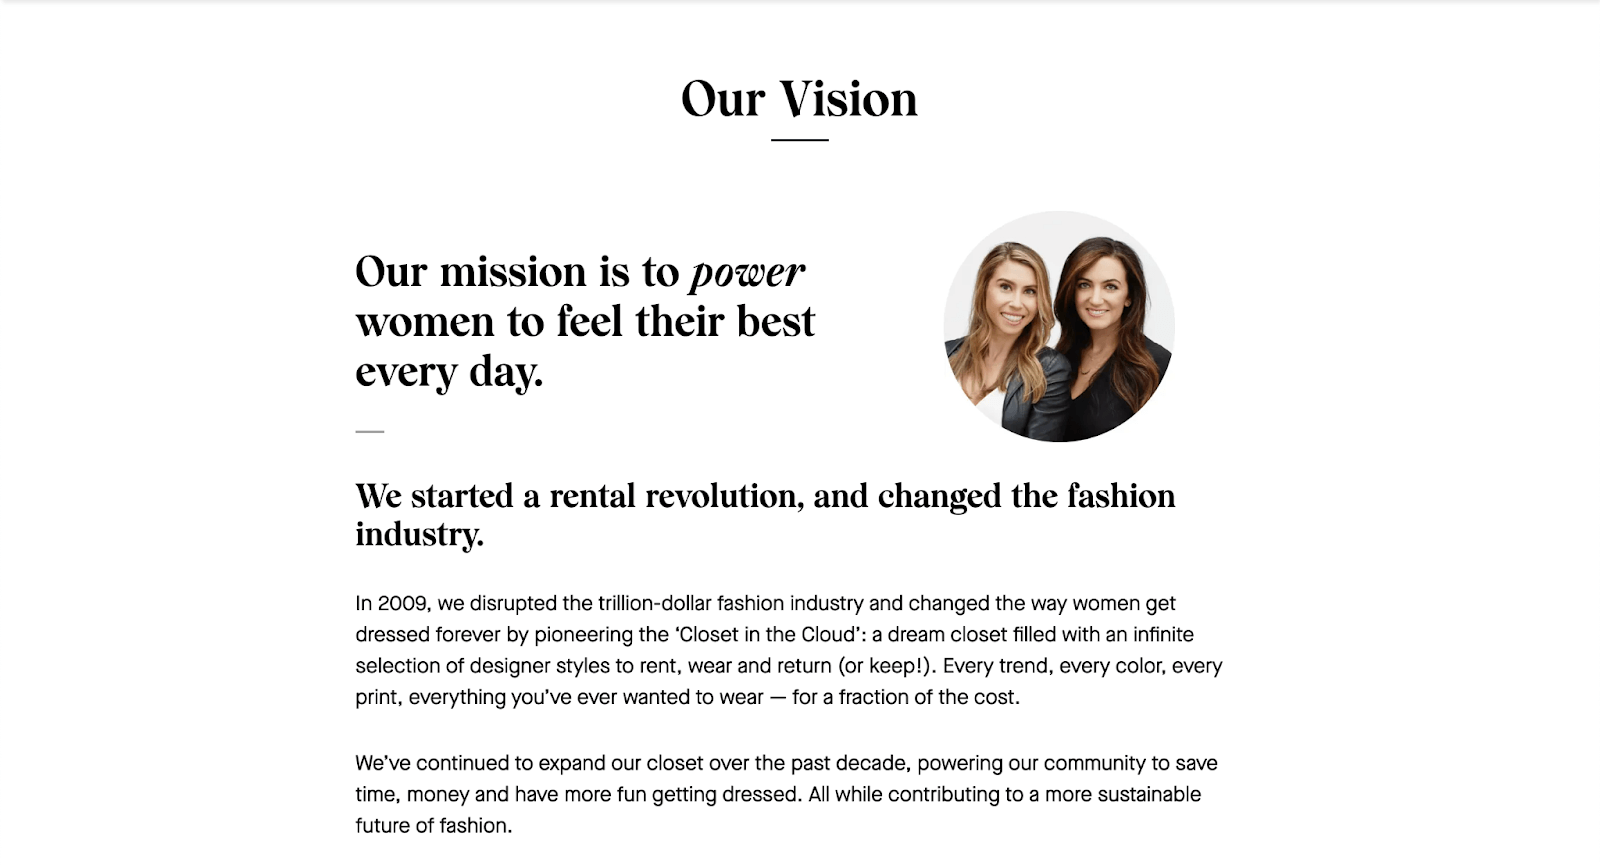 Rent the Runway's "Our Vision" page